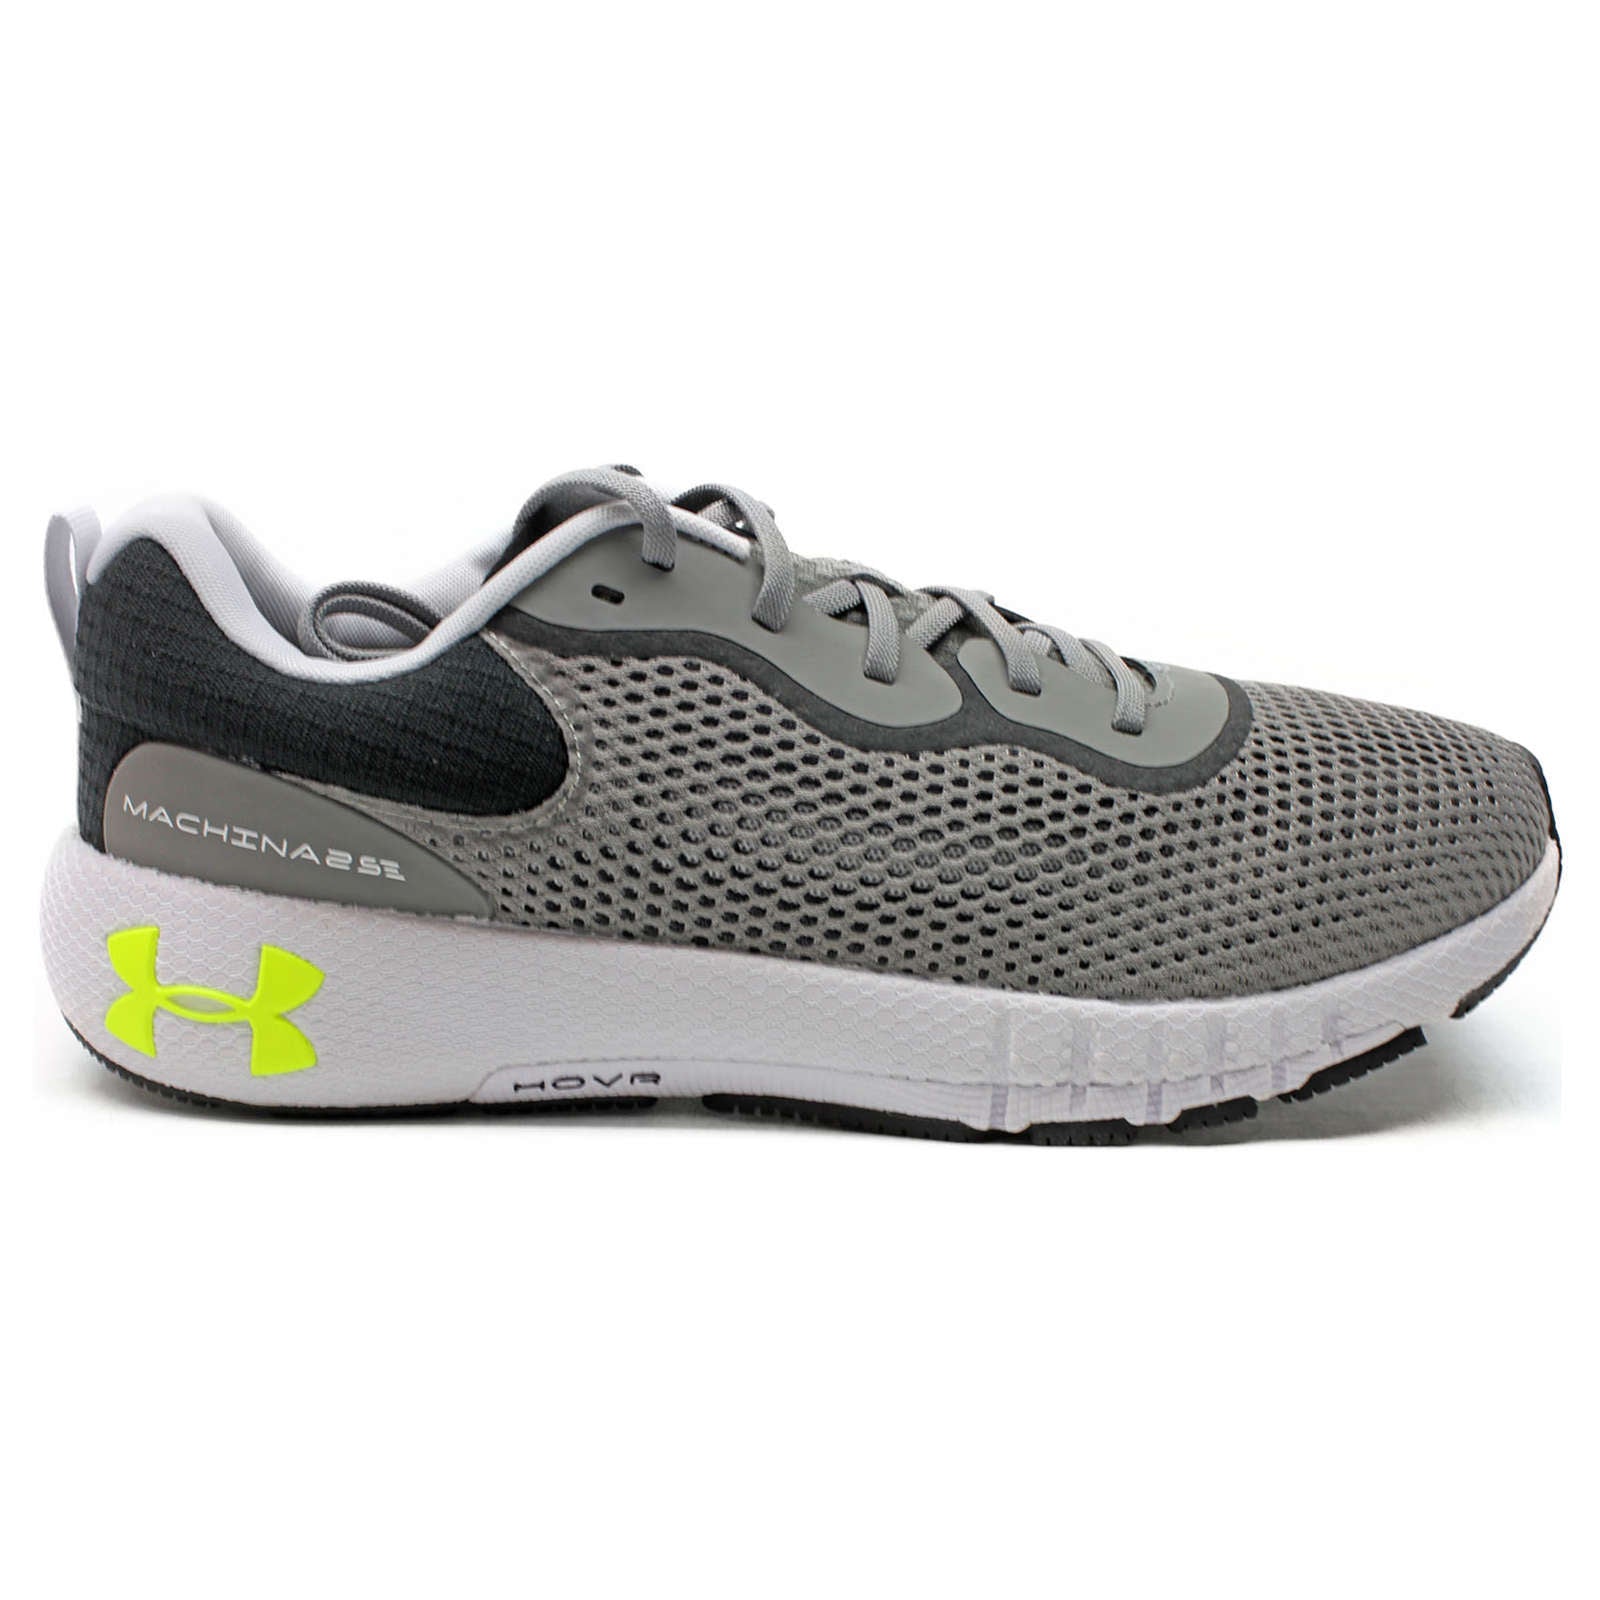 Under Armour HOVR Machina 2 Se Synthetic Textile Men's Low-Top Sneakers#color_grey black